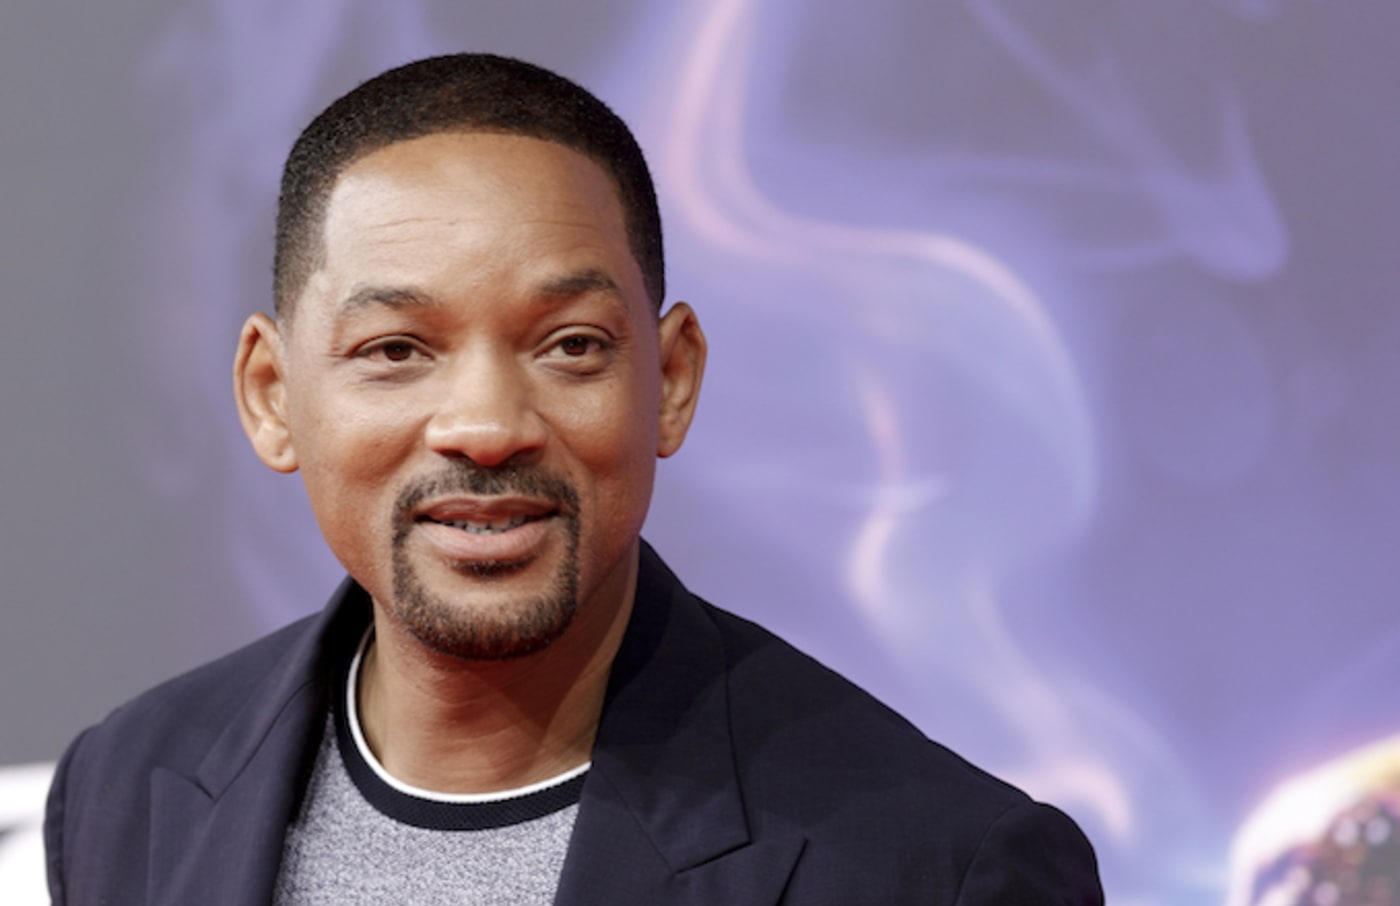 Will Smith attends the movie premiere of "Aladdin" in Berlin, Germany.